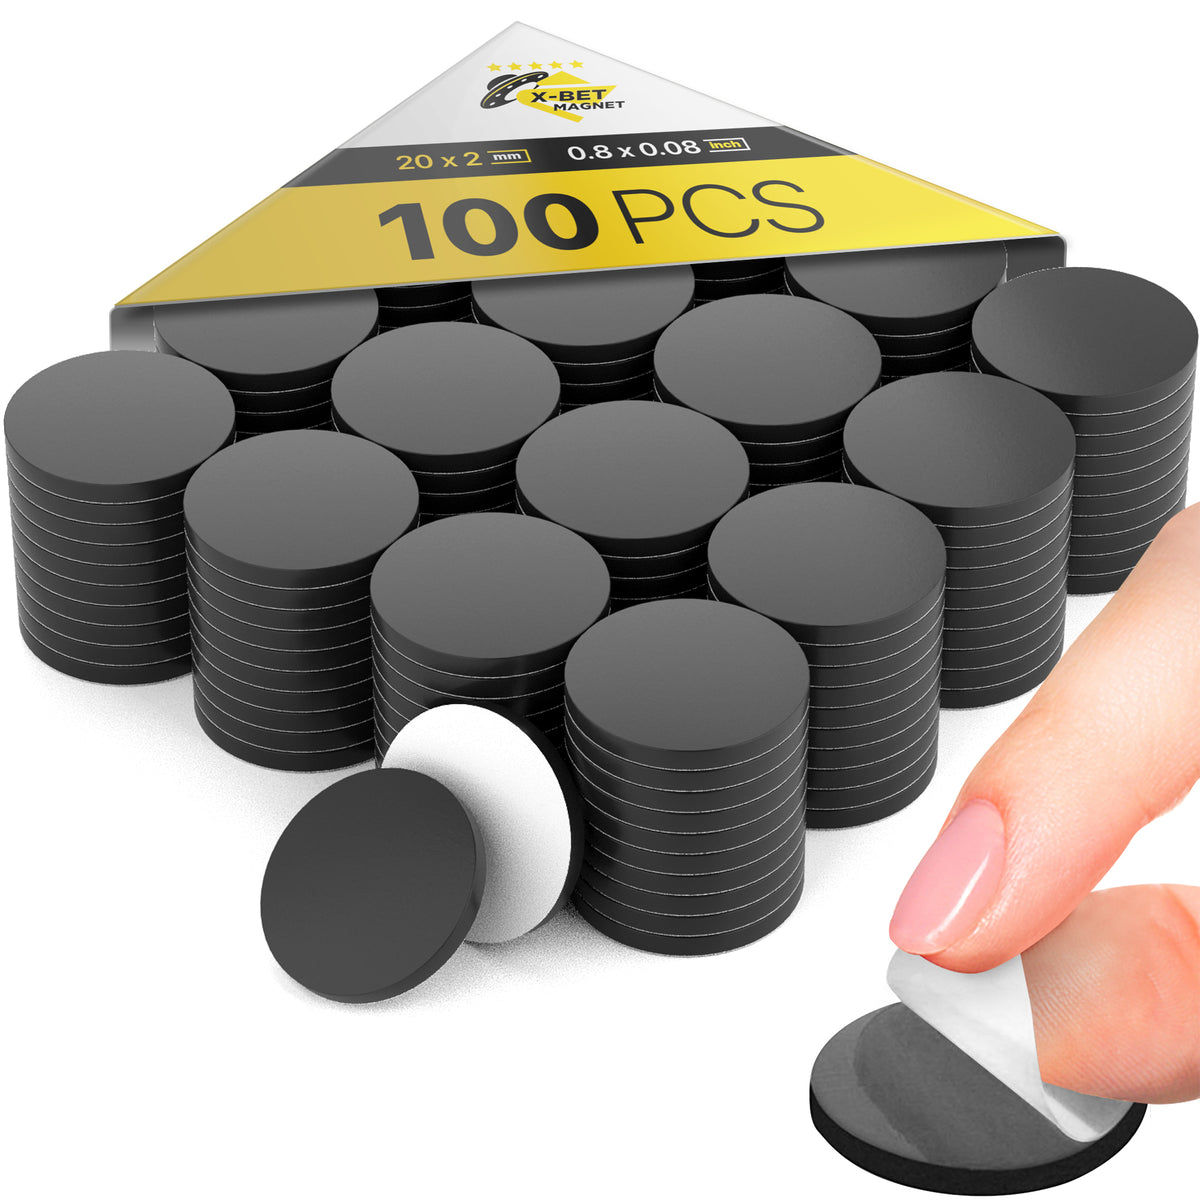 Flexible Adhesive Magnets 100 Pcs - Round Magnets | X-BET